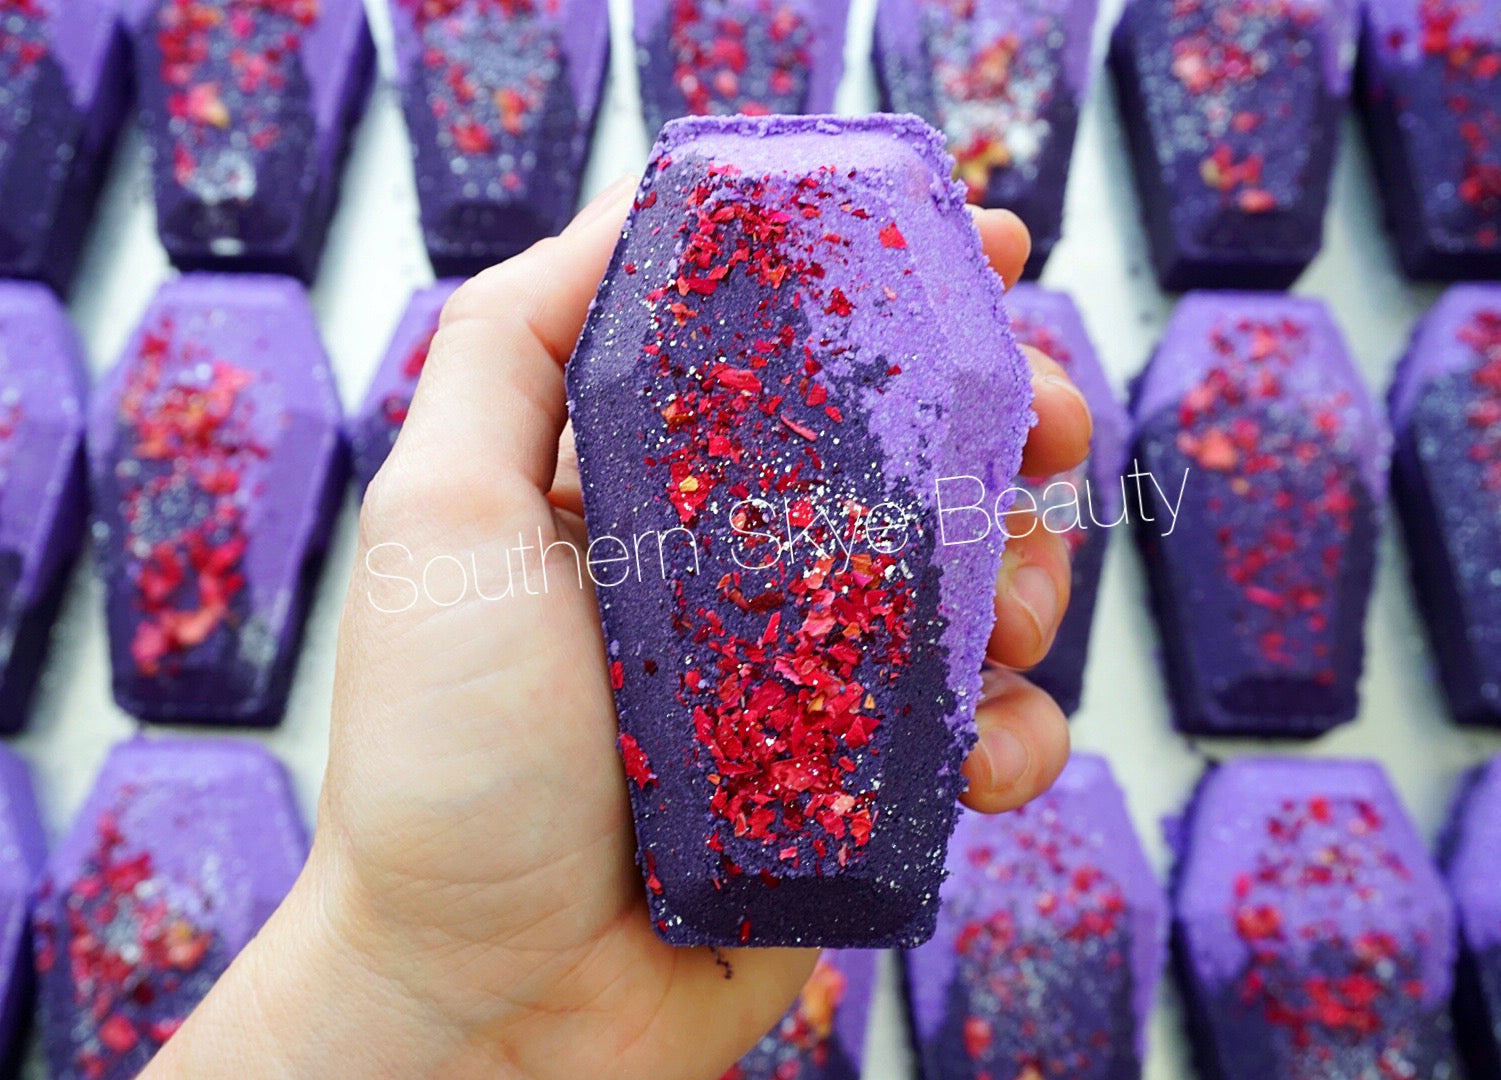 Southern Skye Beauty Ded2Me coffin shaped bath bomb tolped with dried rose petals